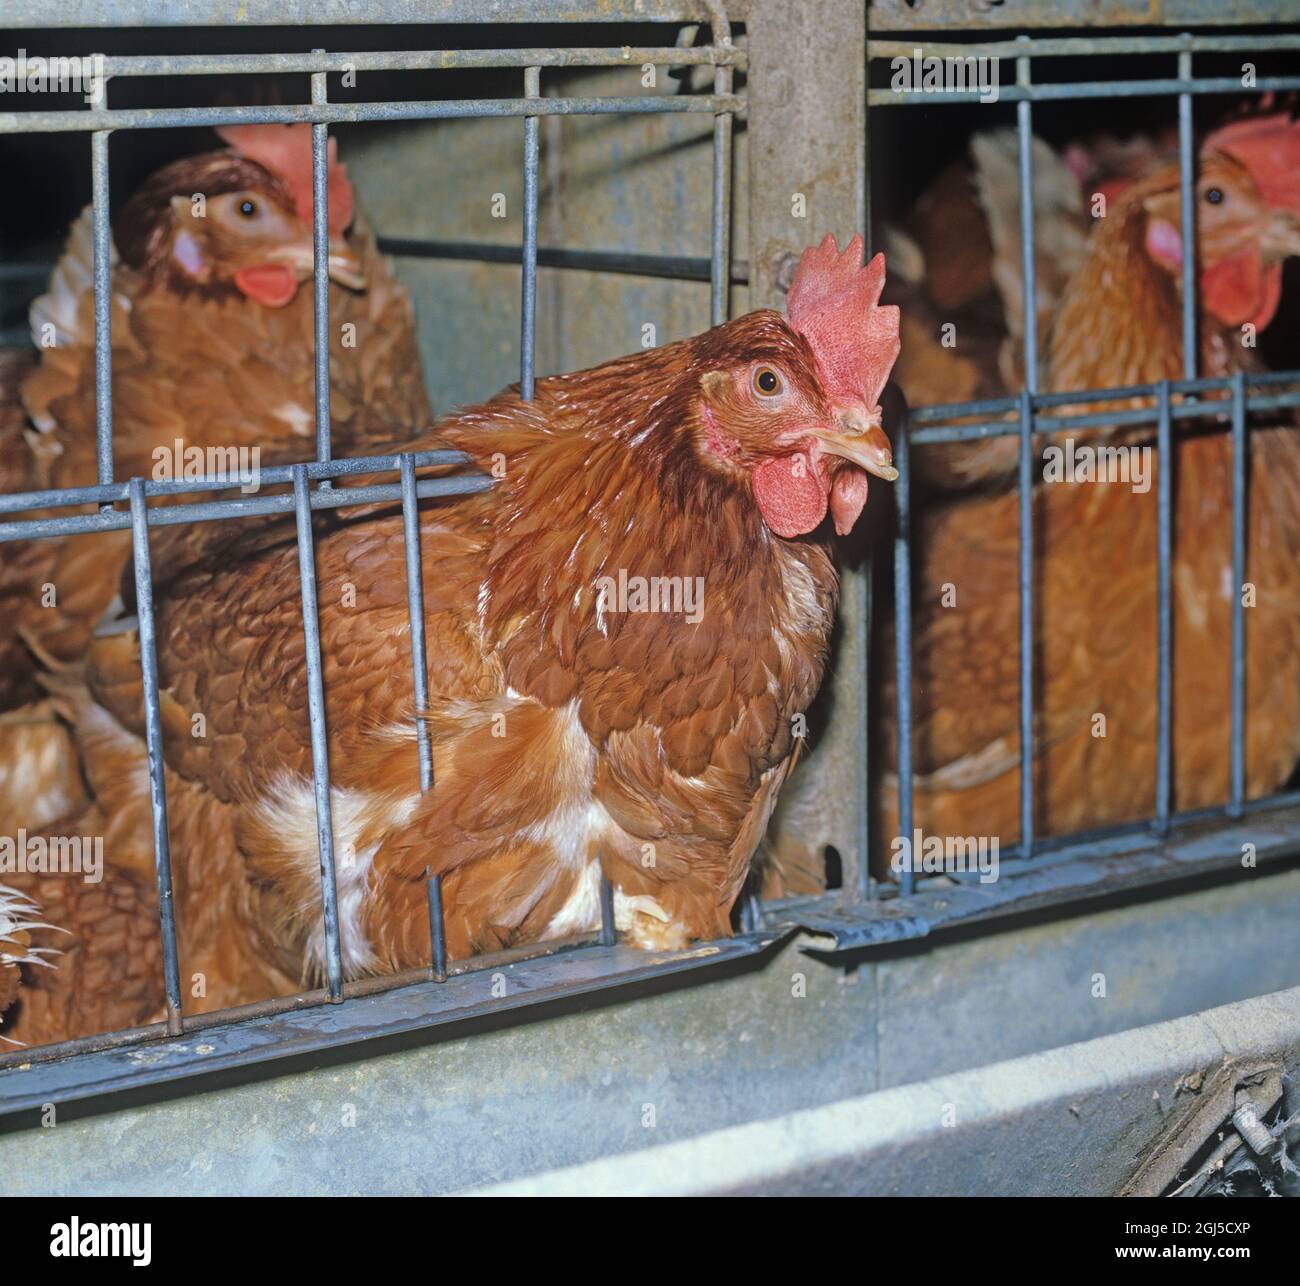 Battery hens (isa brown) egg laying chickens in confined cages with some feather loss, shows access to feeding trough Stock Photo